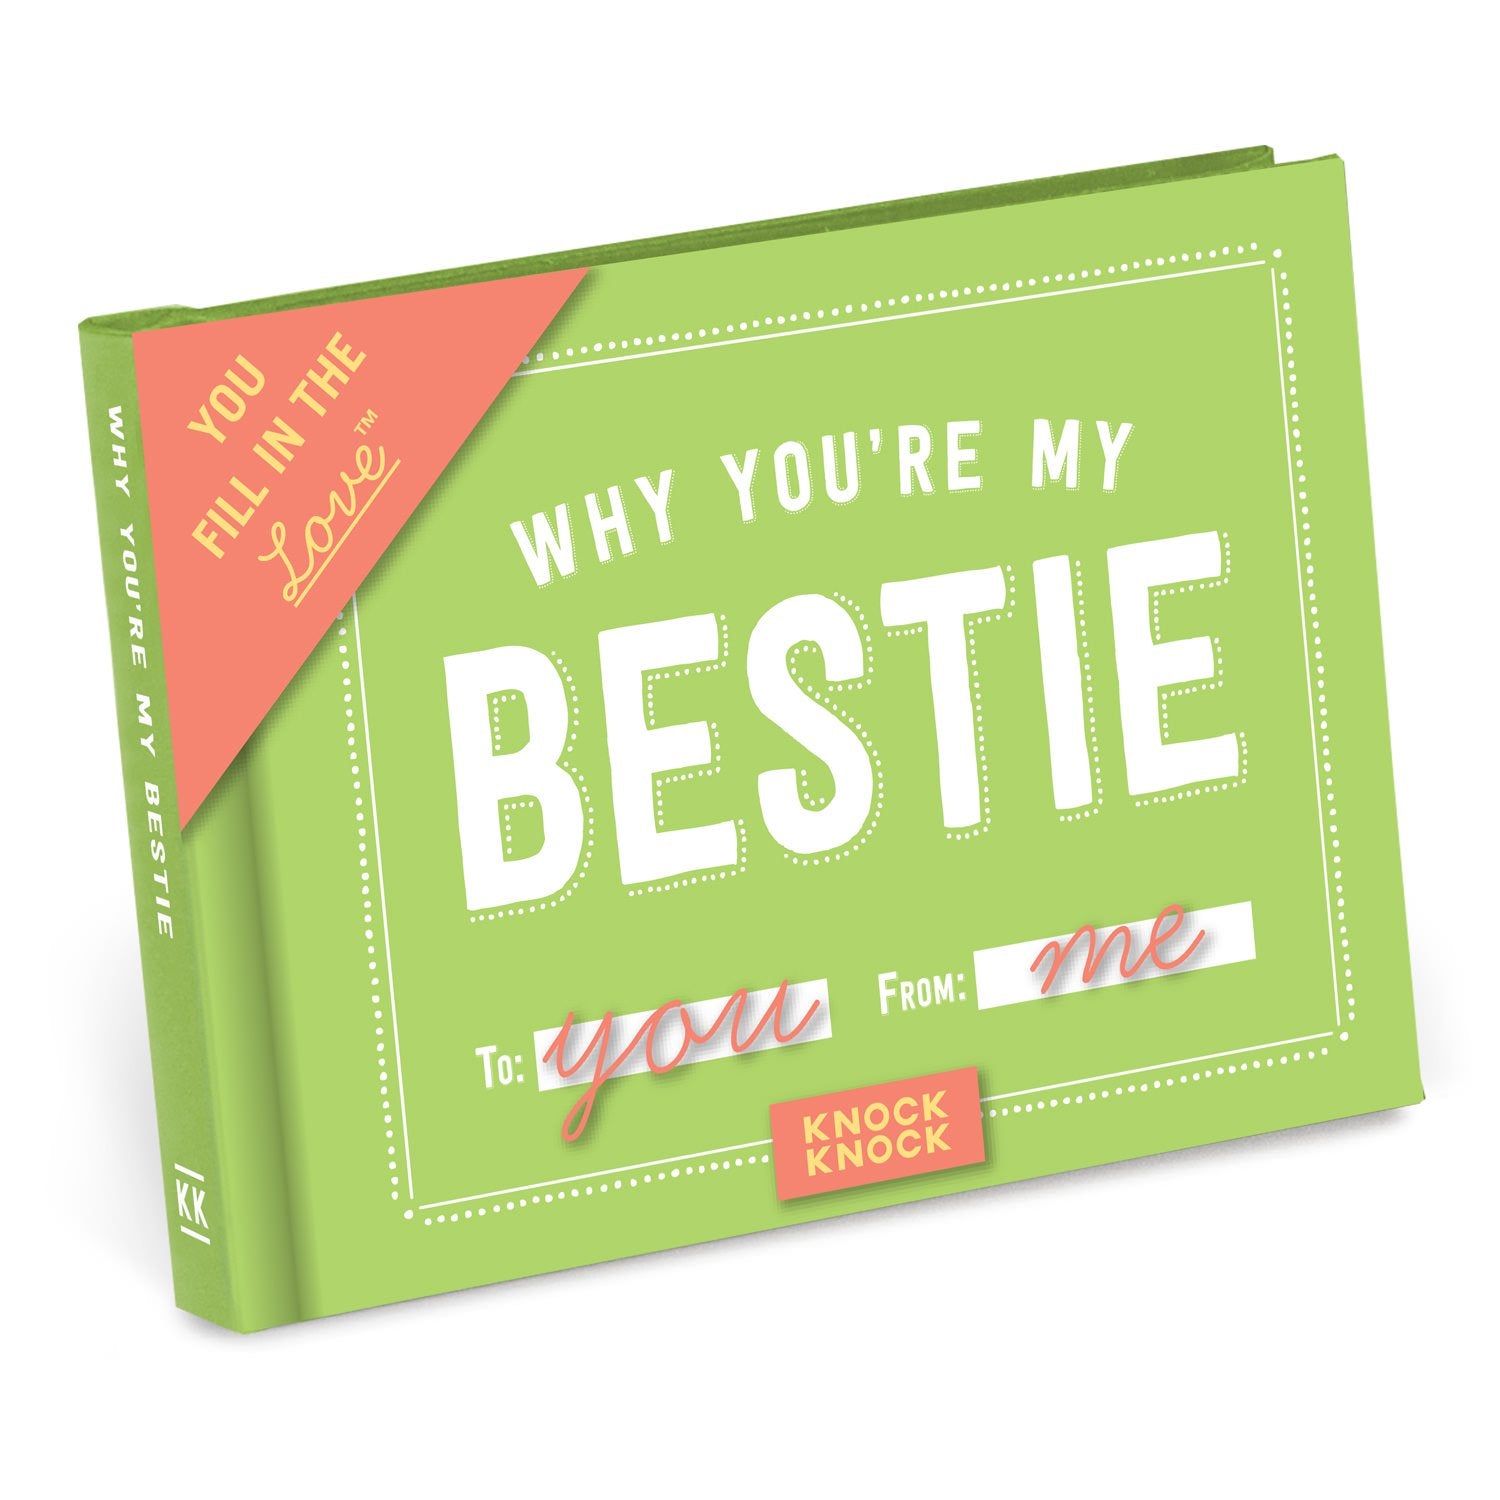 Why You're My Bestie Fill In Book